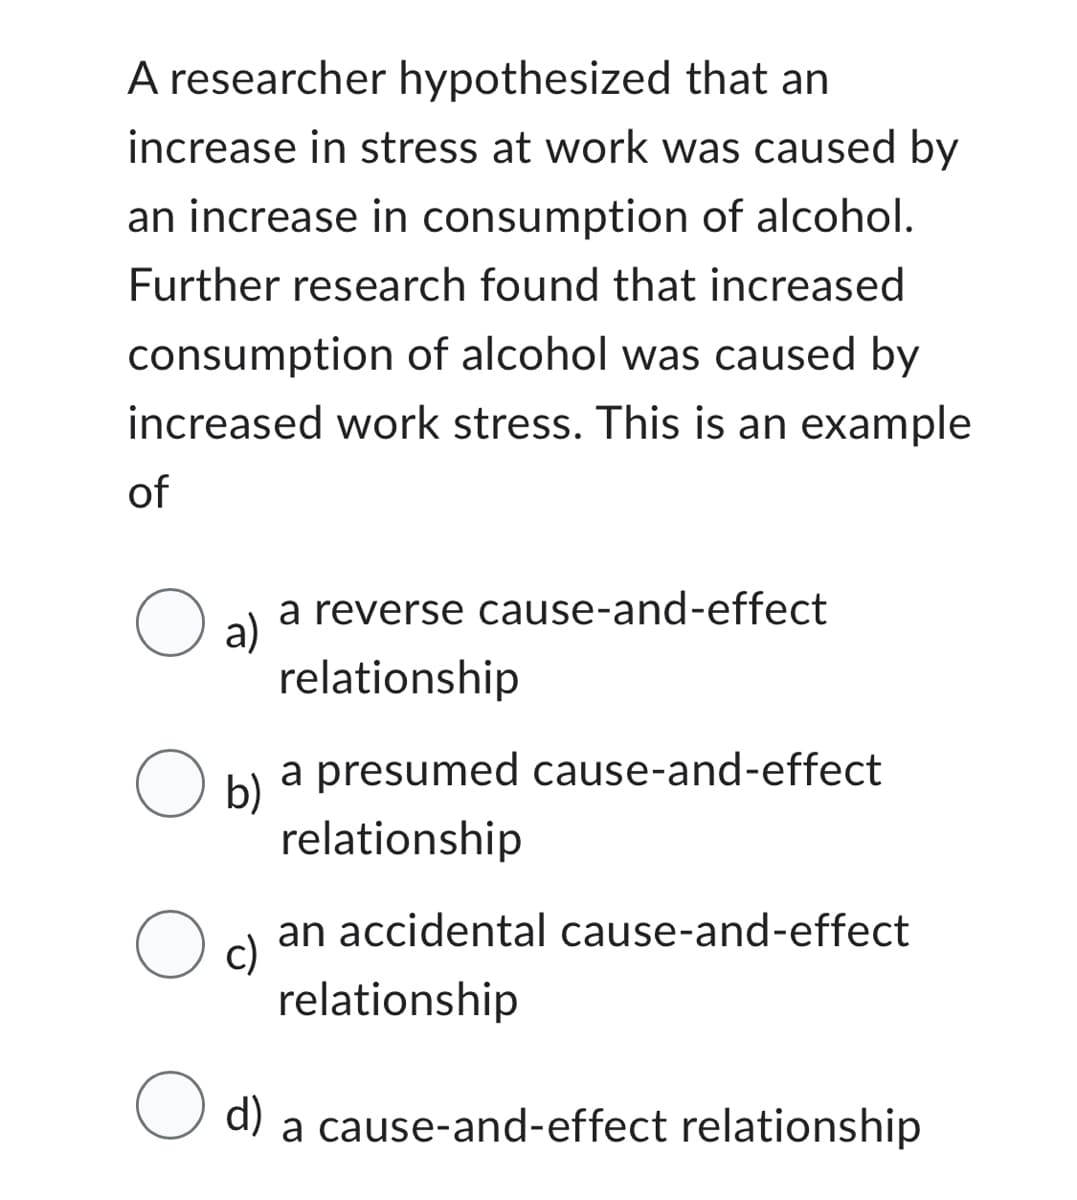 A researcher hypothesized that an
increase in stress at work was caused by
an increase in consumption of alcohol.
Further research found that increased
consumption of alcohol was caused by
increased work stress. This is an example
of
O al
a reverse cause-and-effect
relationship
a presumed cause-and-effect
relationship
an accidental cause-and-effect
c)
relationship
d)
a cause-and-effect relationship
O b)